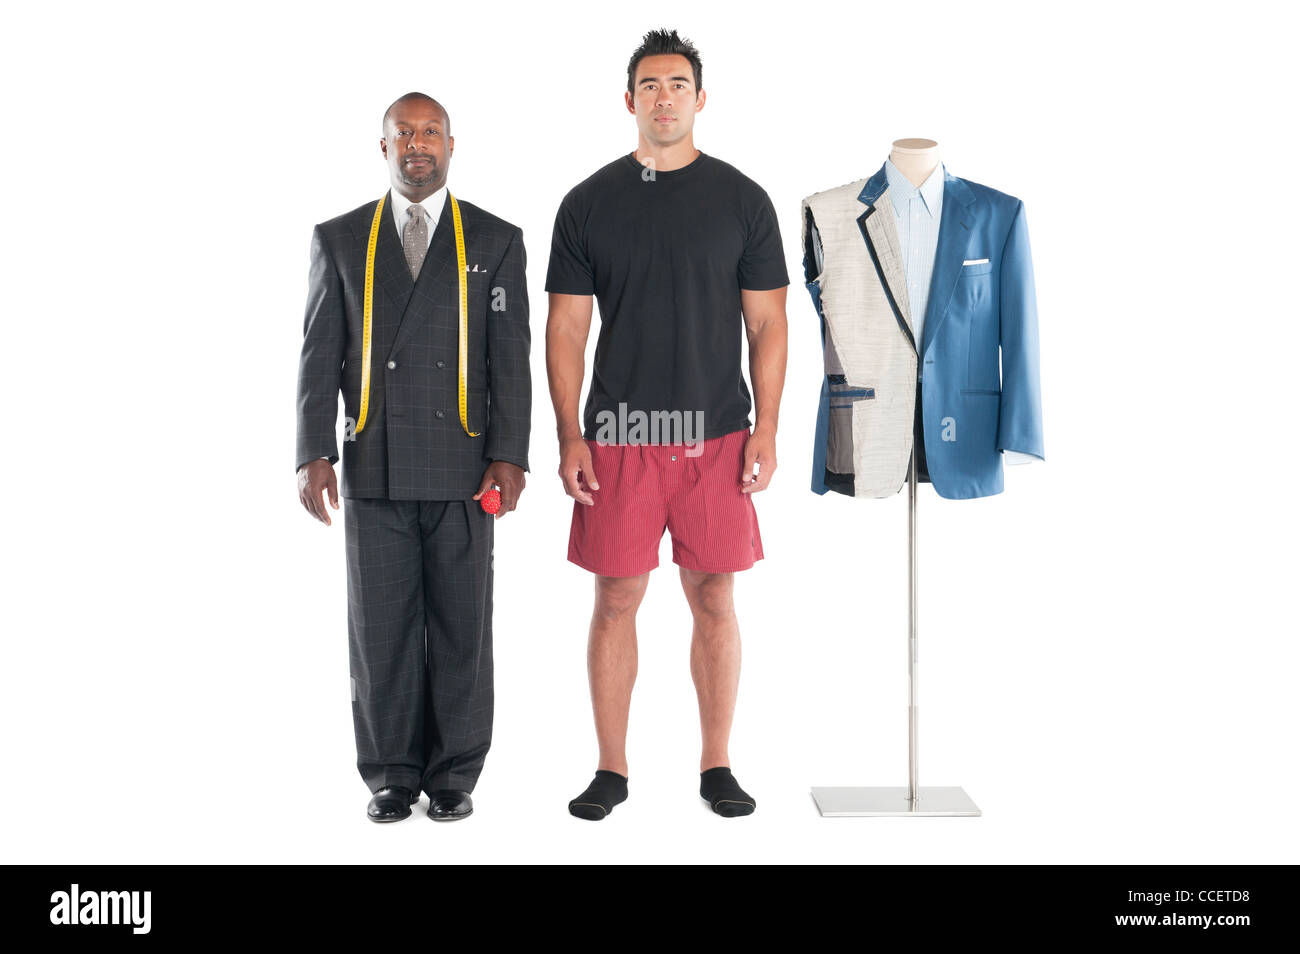 Portrait of tailor standing with customer over white background Stock Photo